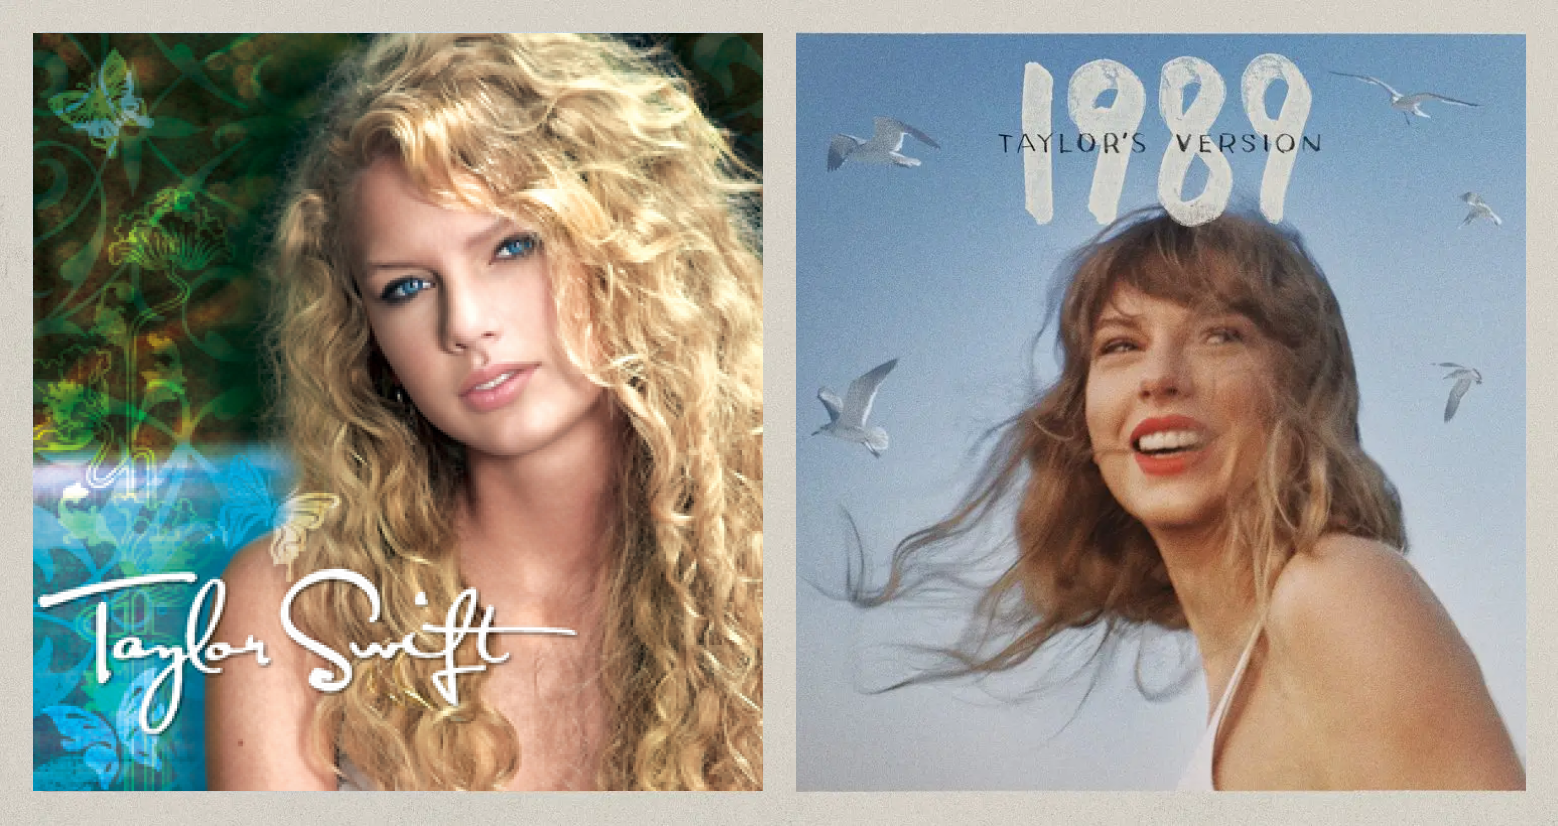 Taylor Swift's first and latest album cover